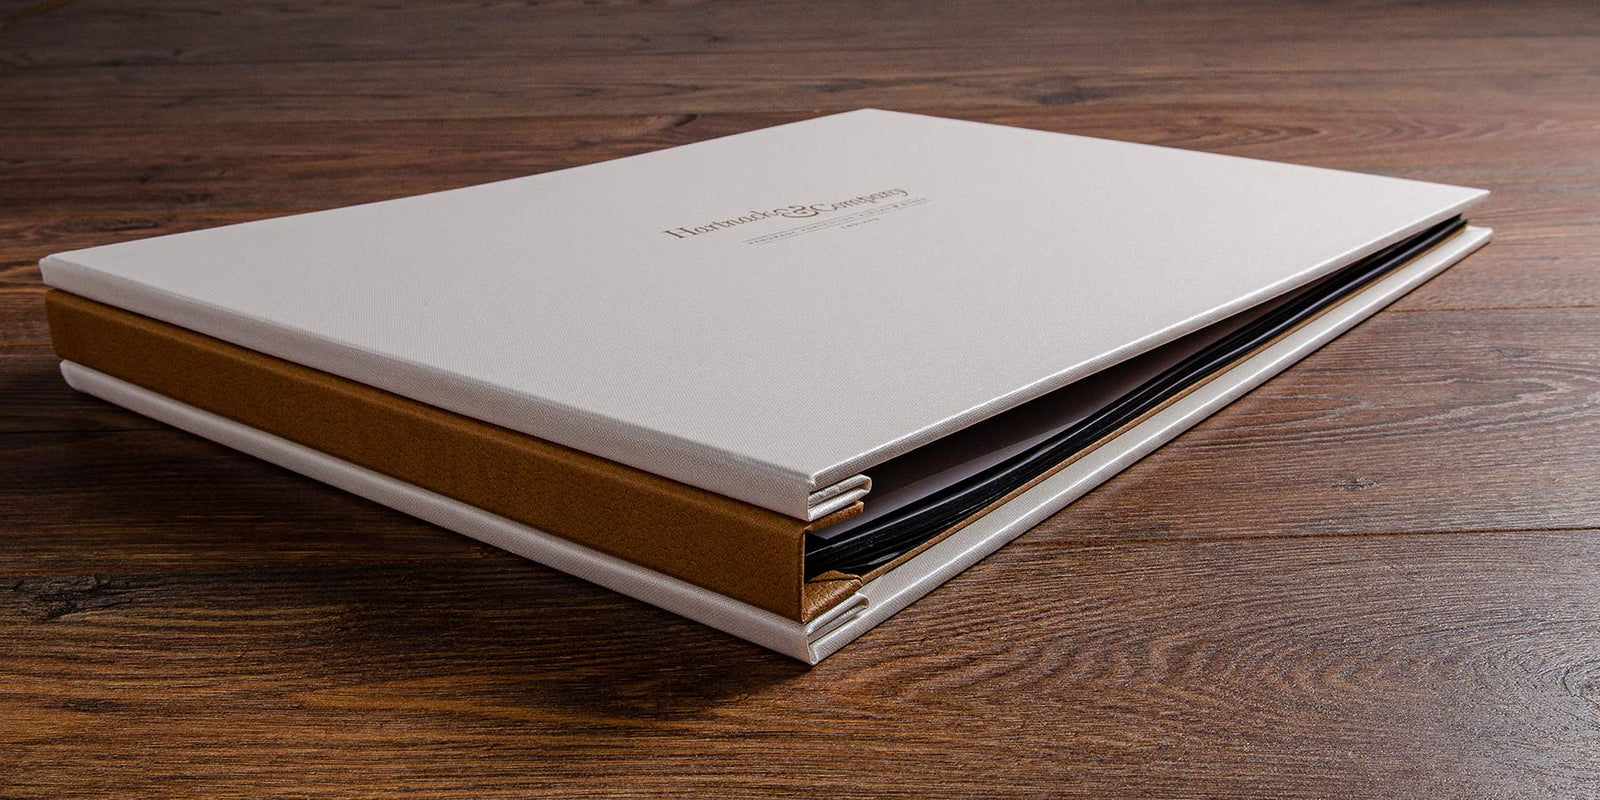 A photographers portfolio book with a personalised embossed cover